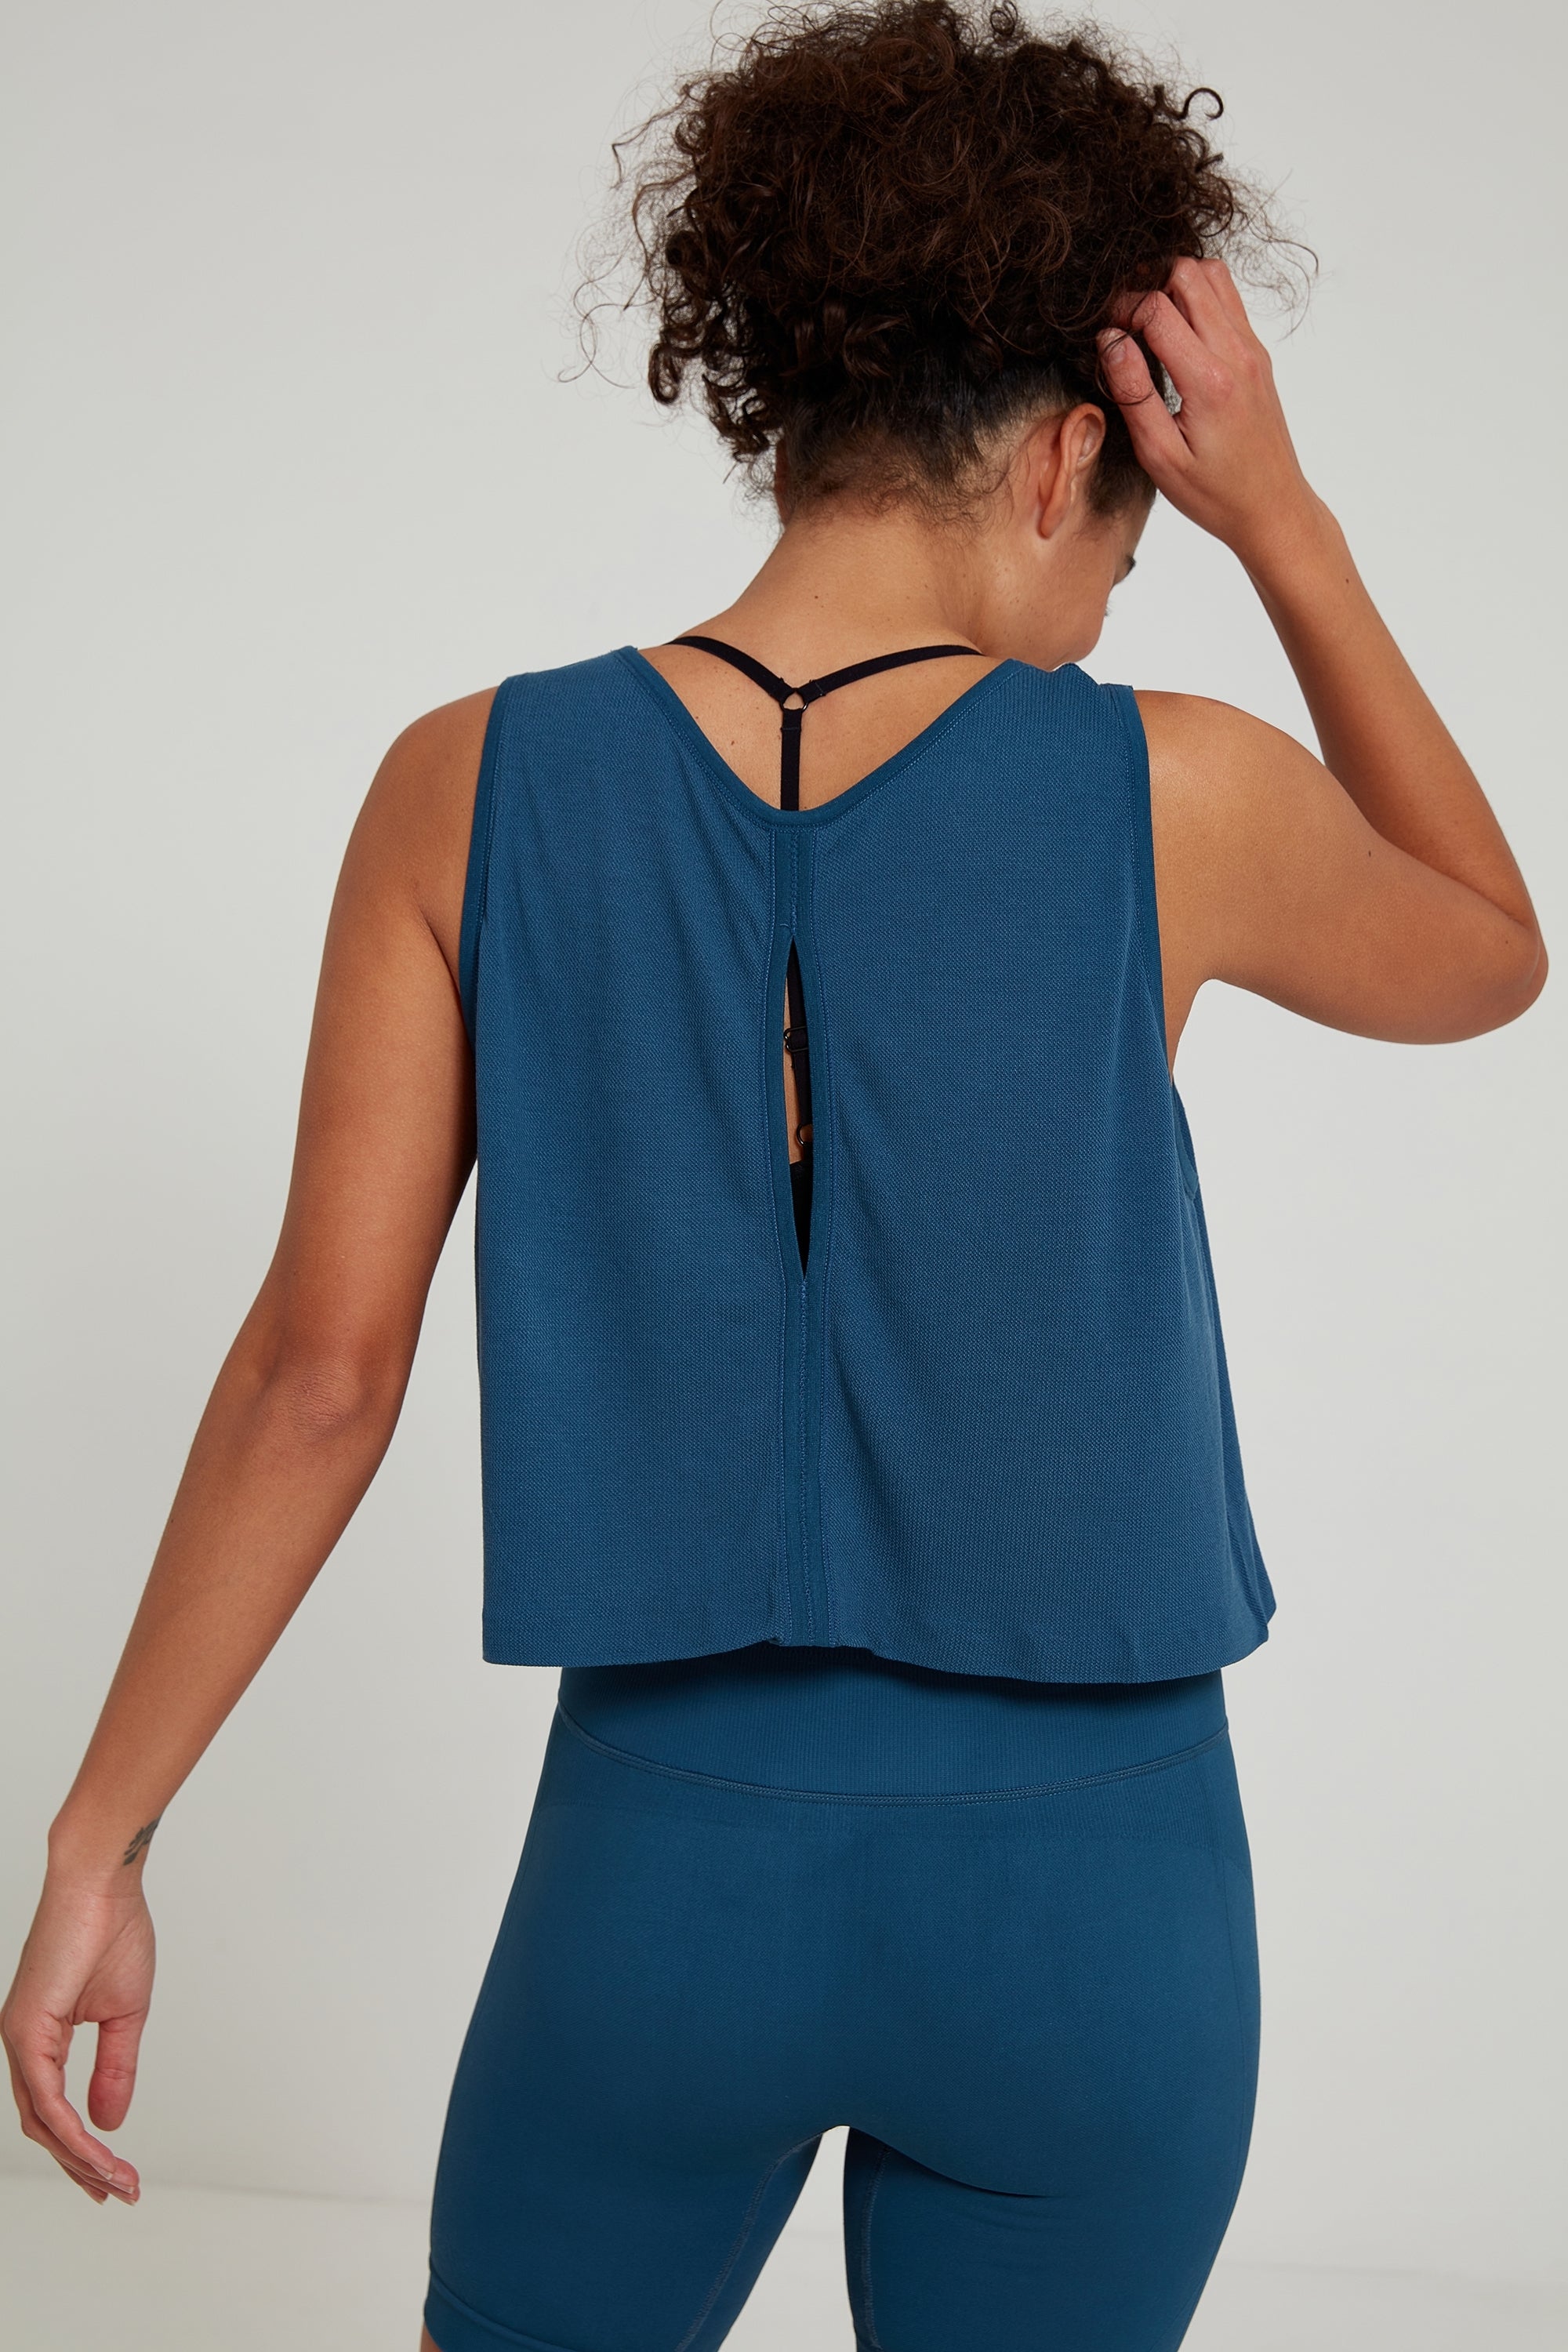 Model wearing blue leggings and blue sports yoga tank top for sustainable activewear brand, Jilla.  